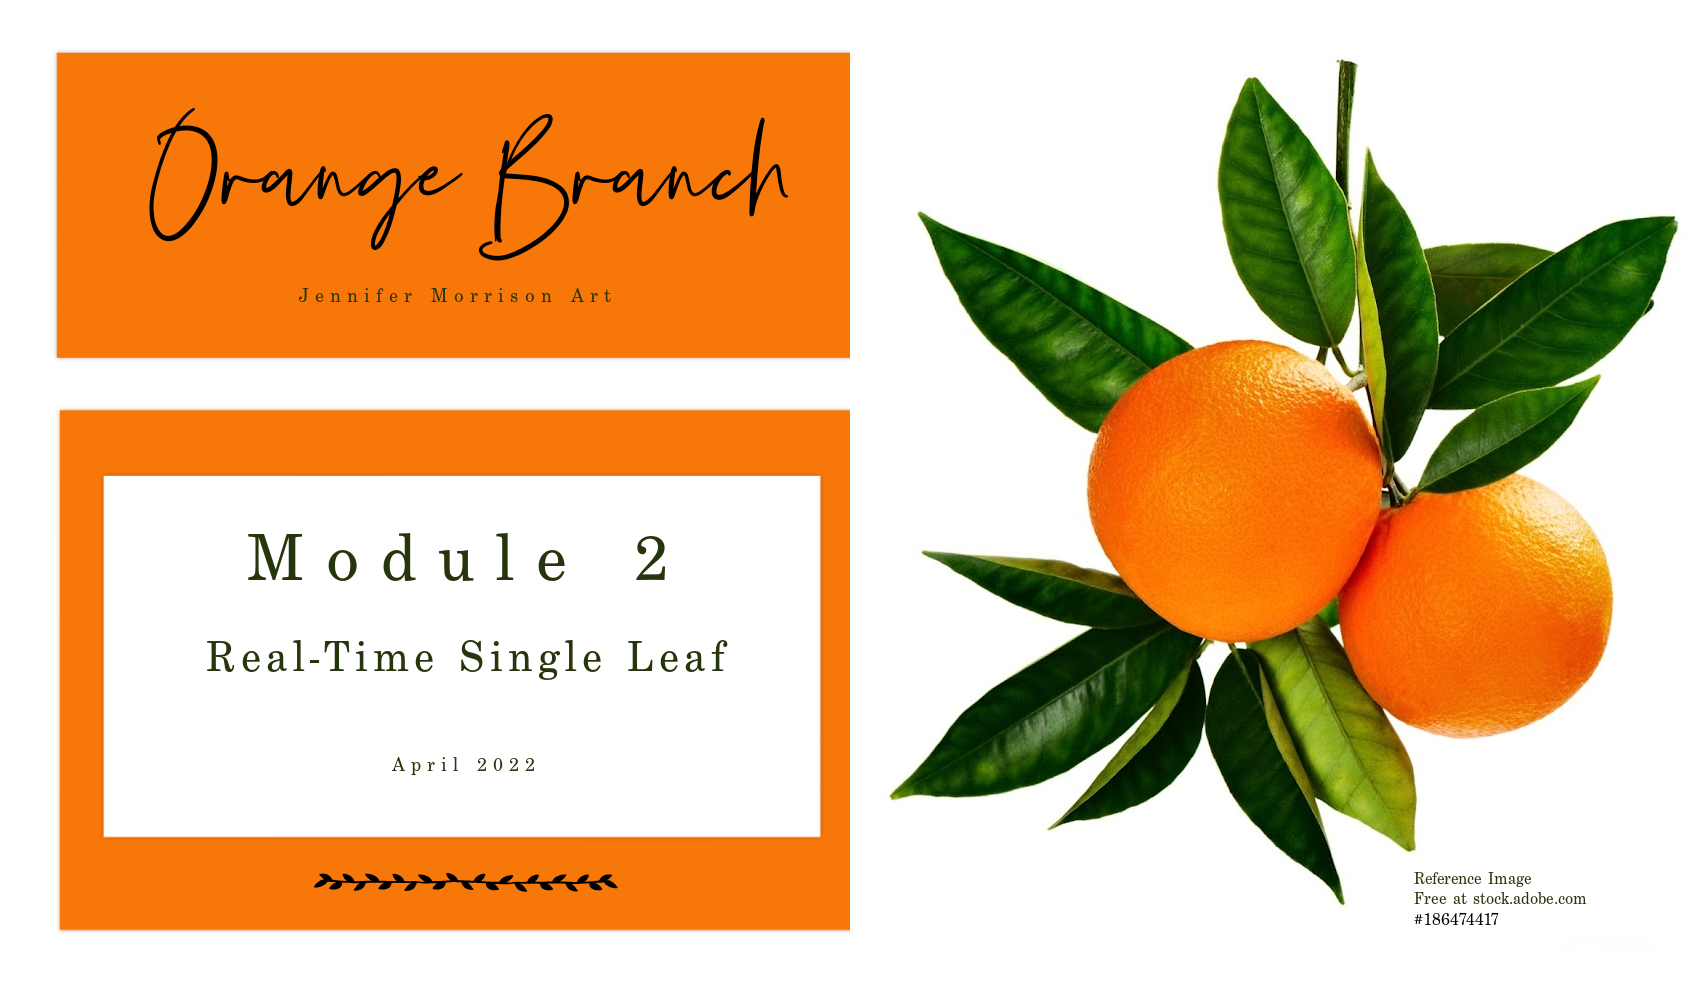 Link to Colored Pencil Drawing Tutorial of an Orange Branch